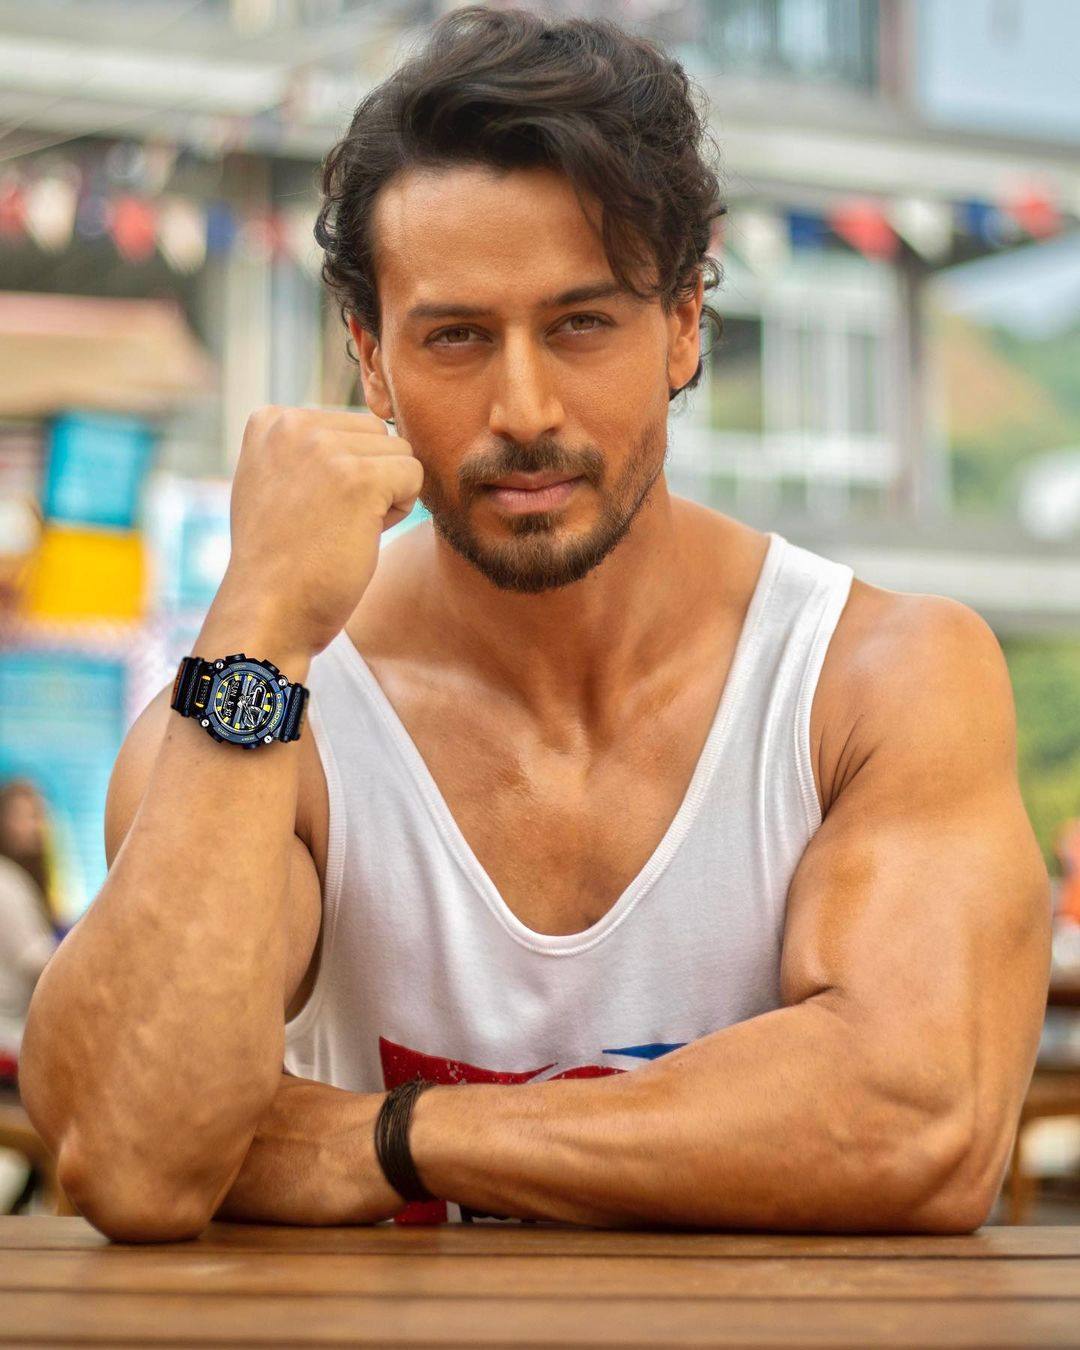 The multi-hyphenated actor, dancer and MMA enthusiast Tiger Shroff is one of Bollywood’s hottest stars right now. Photo: @tigerjackieshroff/Instagram